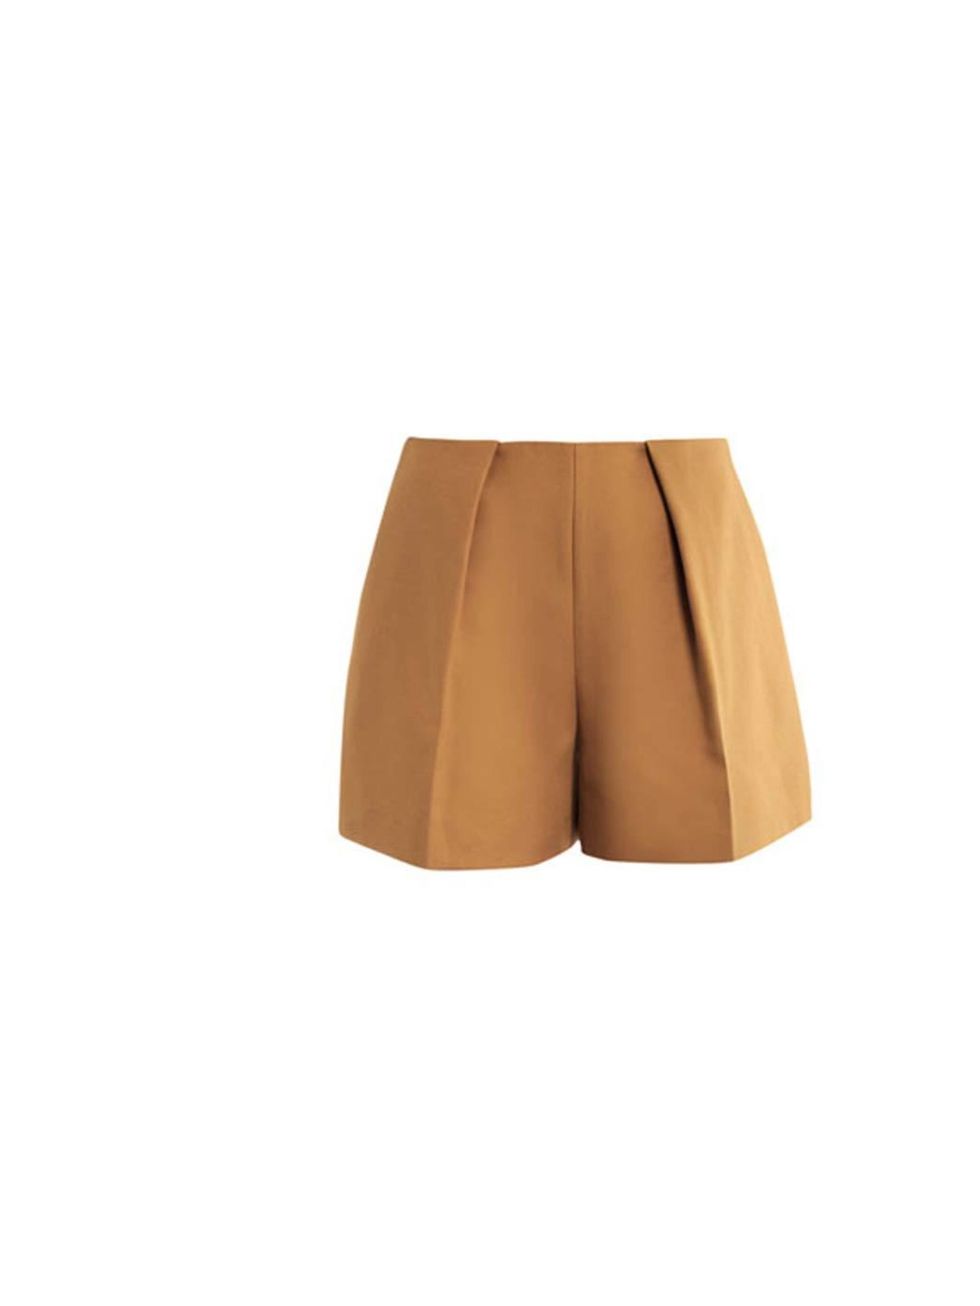 <p>A tailored style and a classic tan colour is the perfect combination like these shorts from Carven available at <a href="http://www.matchesfashion.com/product/138228">matches</a>, £220.</p><p>They are smart enough to wear to work or on a summer city br